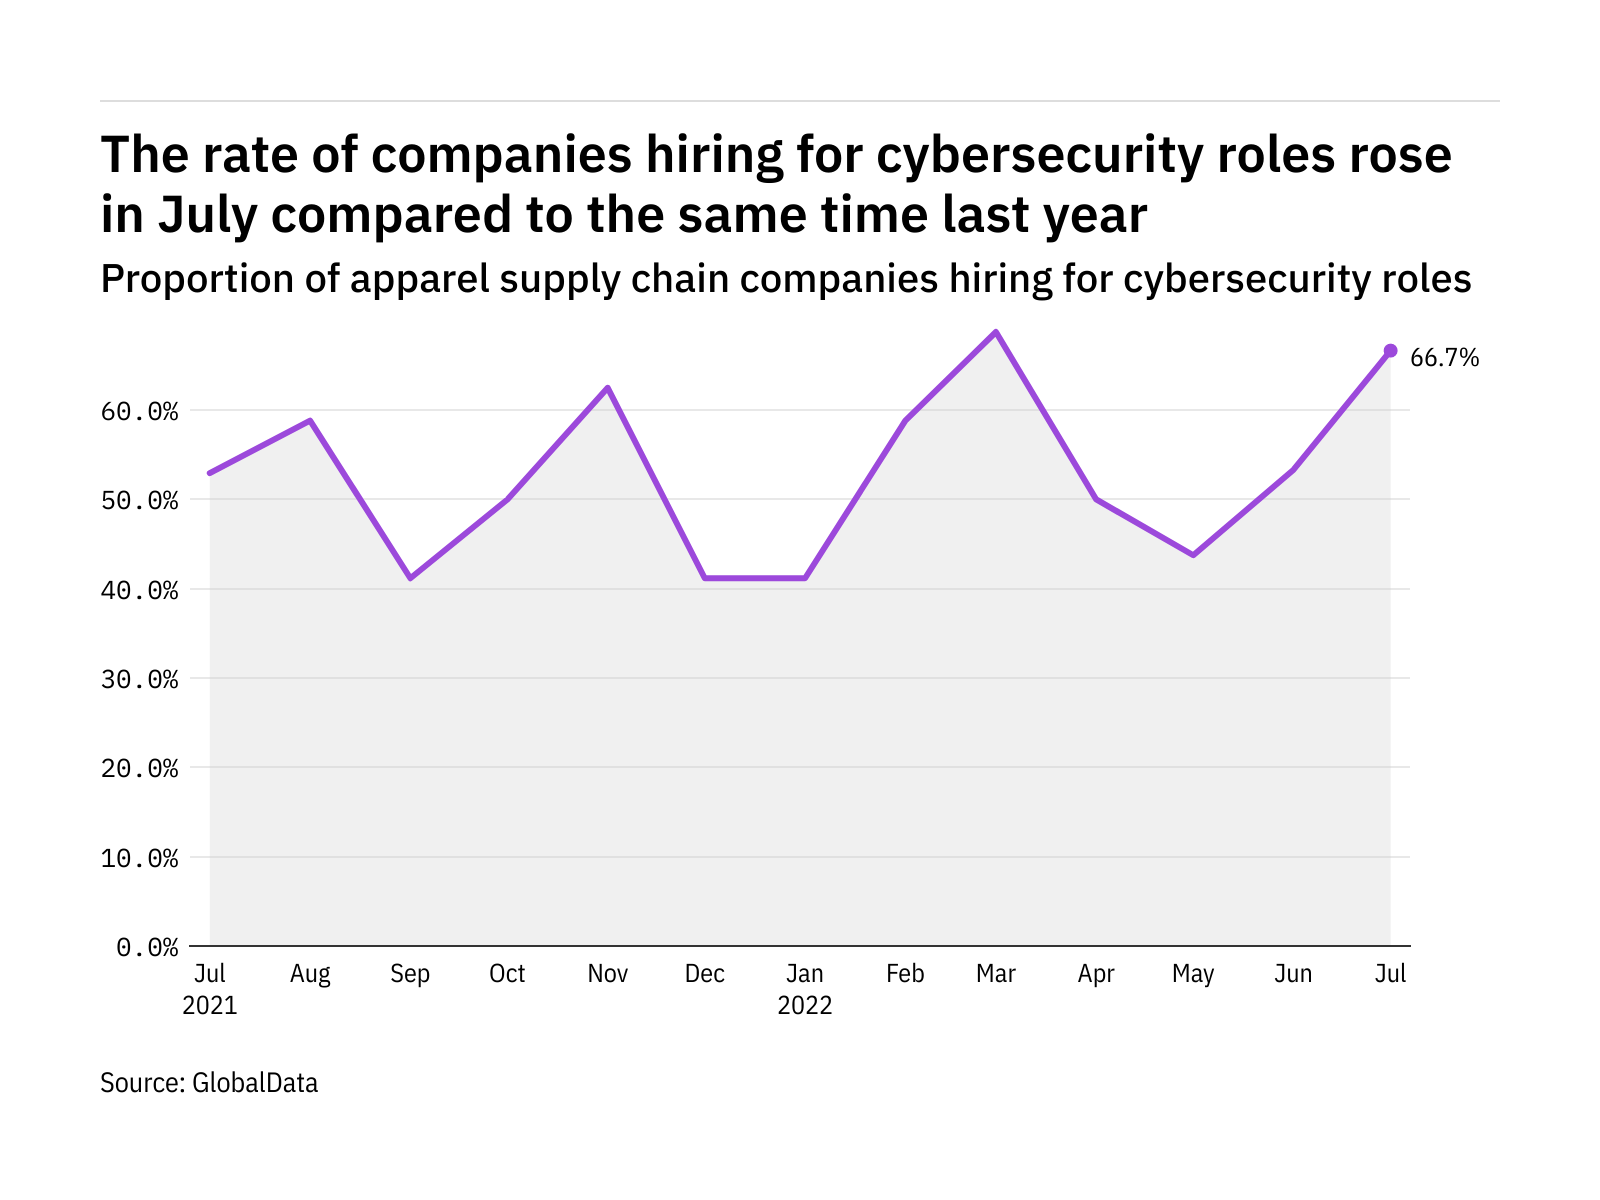 Cybersecurity hiring levels in the apparel industry rose in July 2022